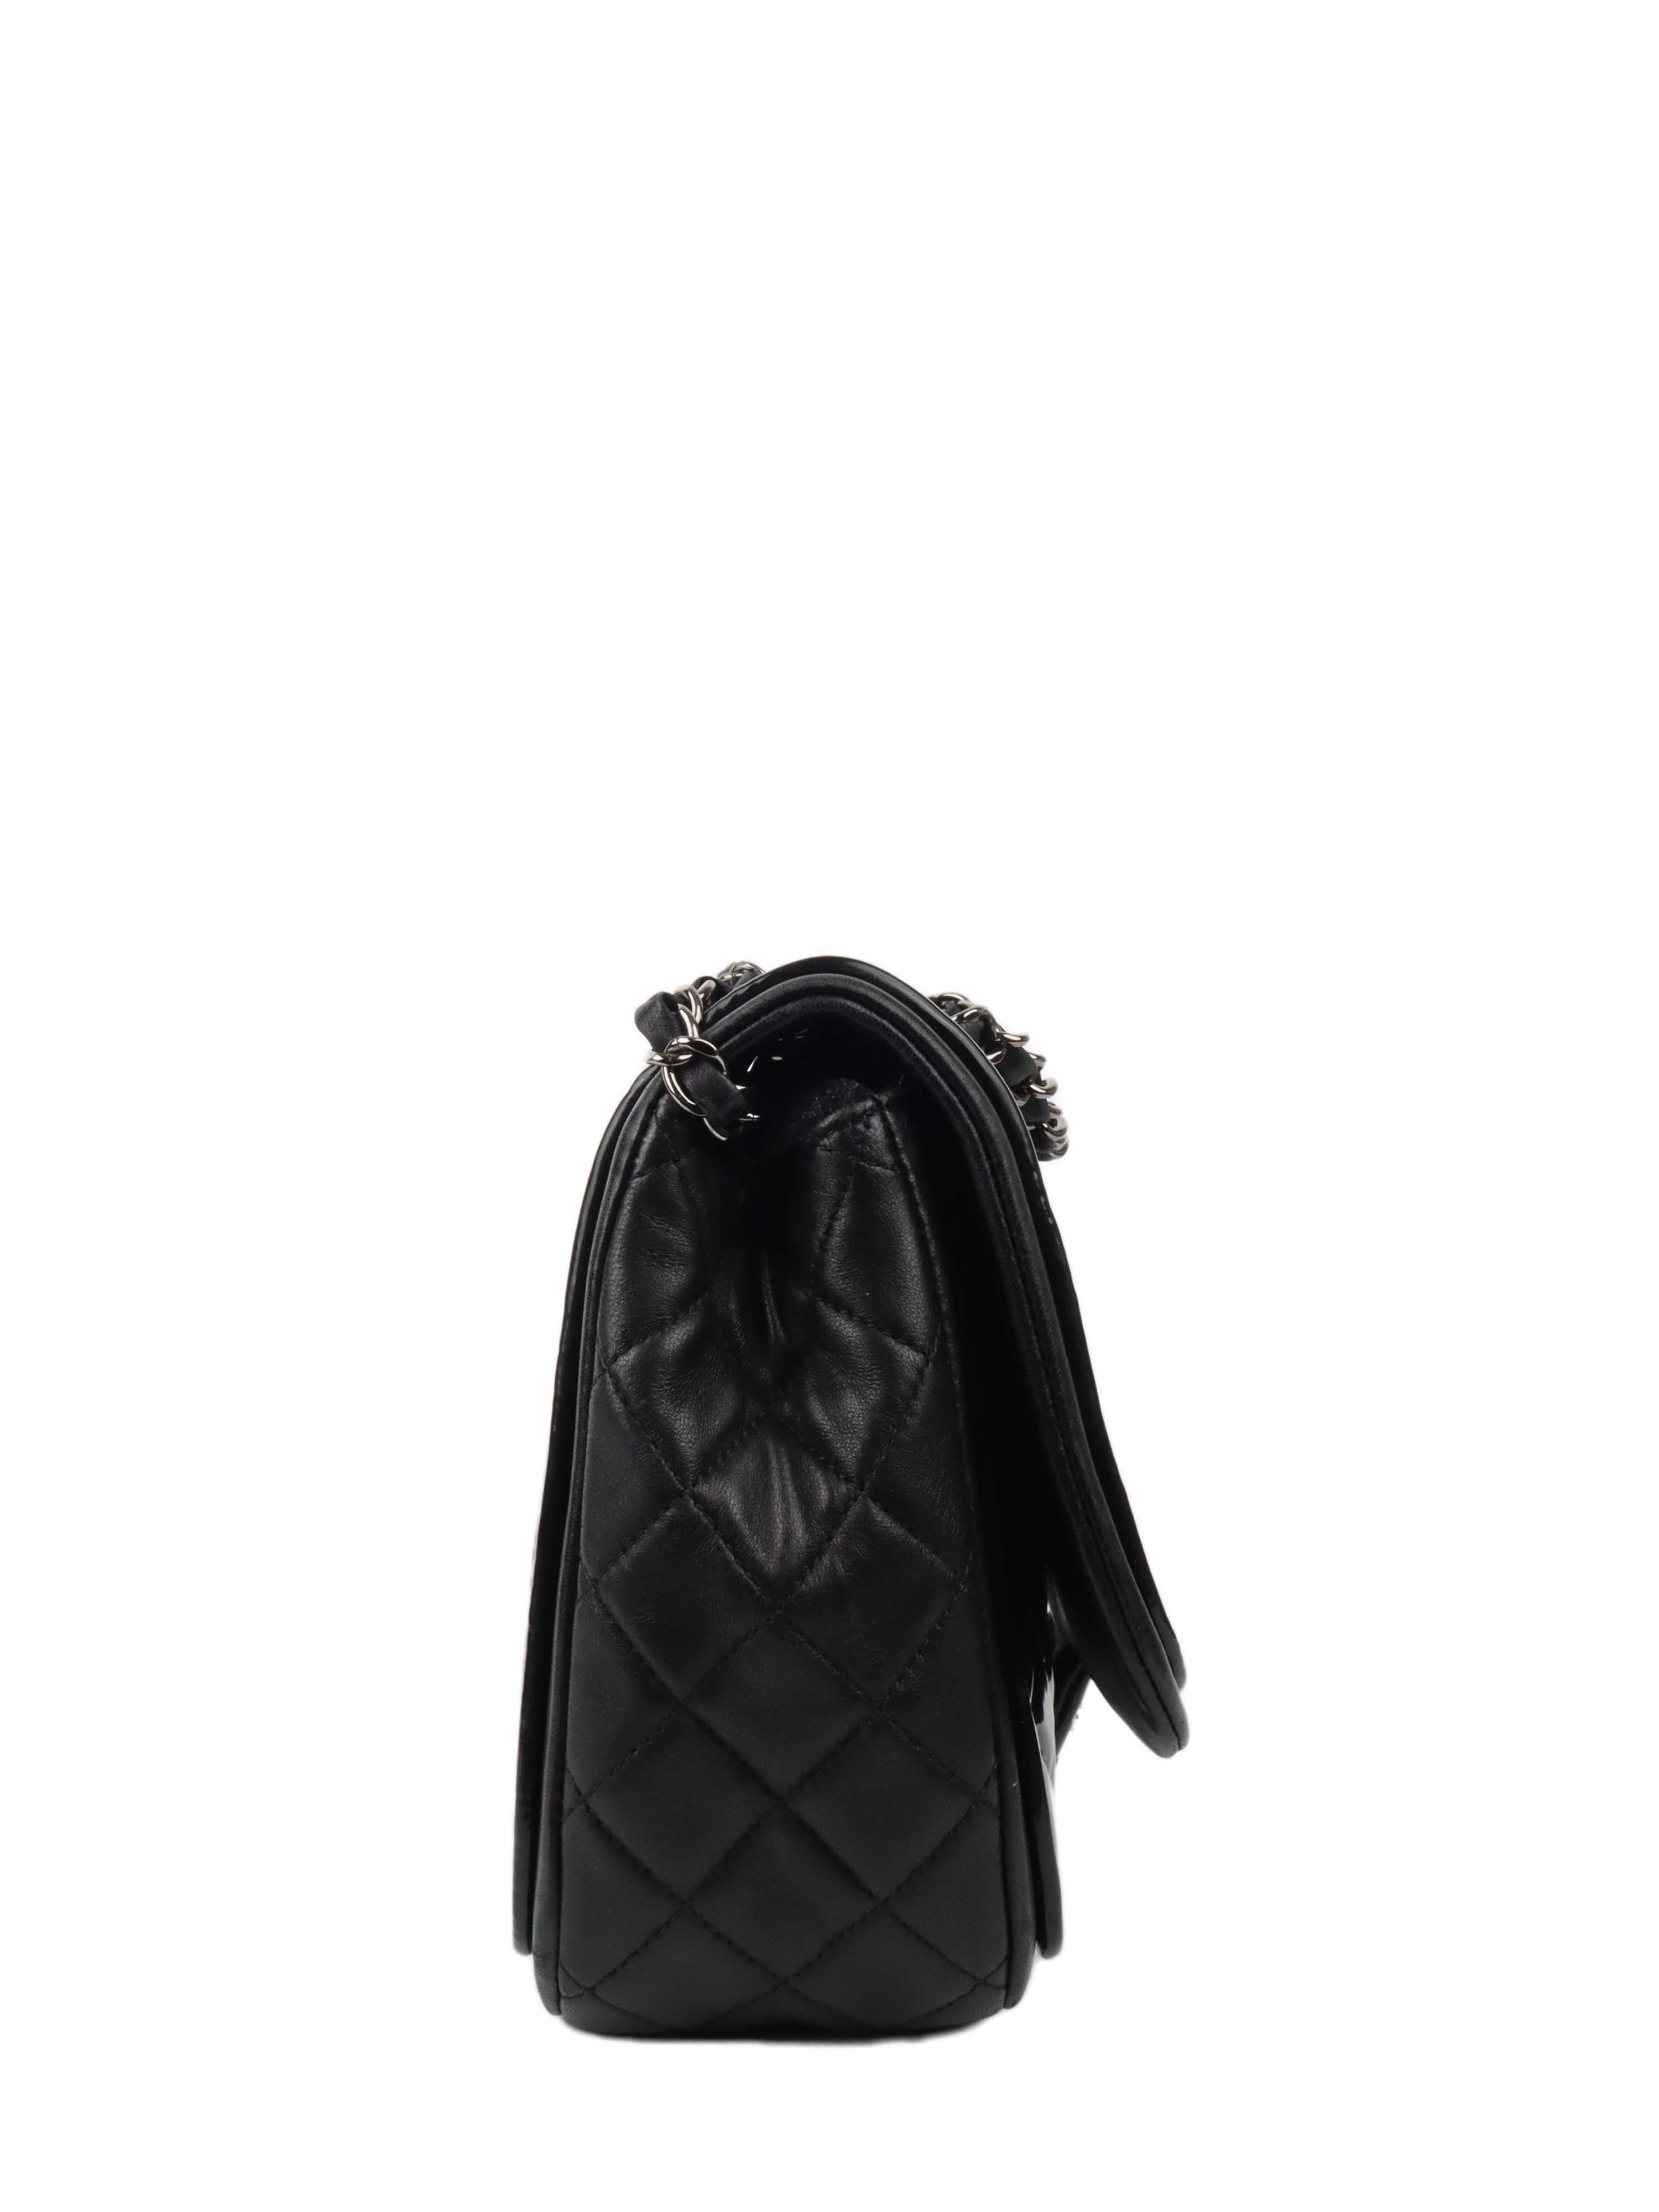 Chanel Black Patent Quilted Flap Bag SHW.